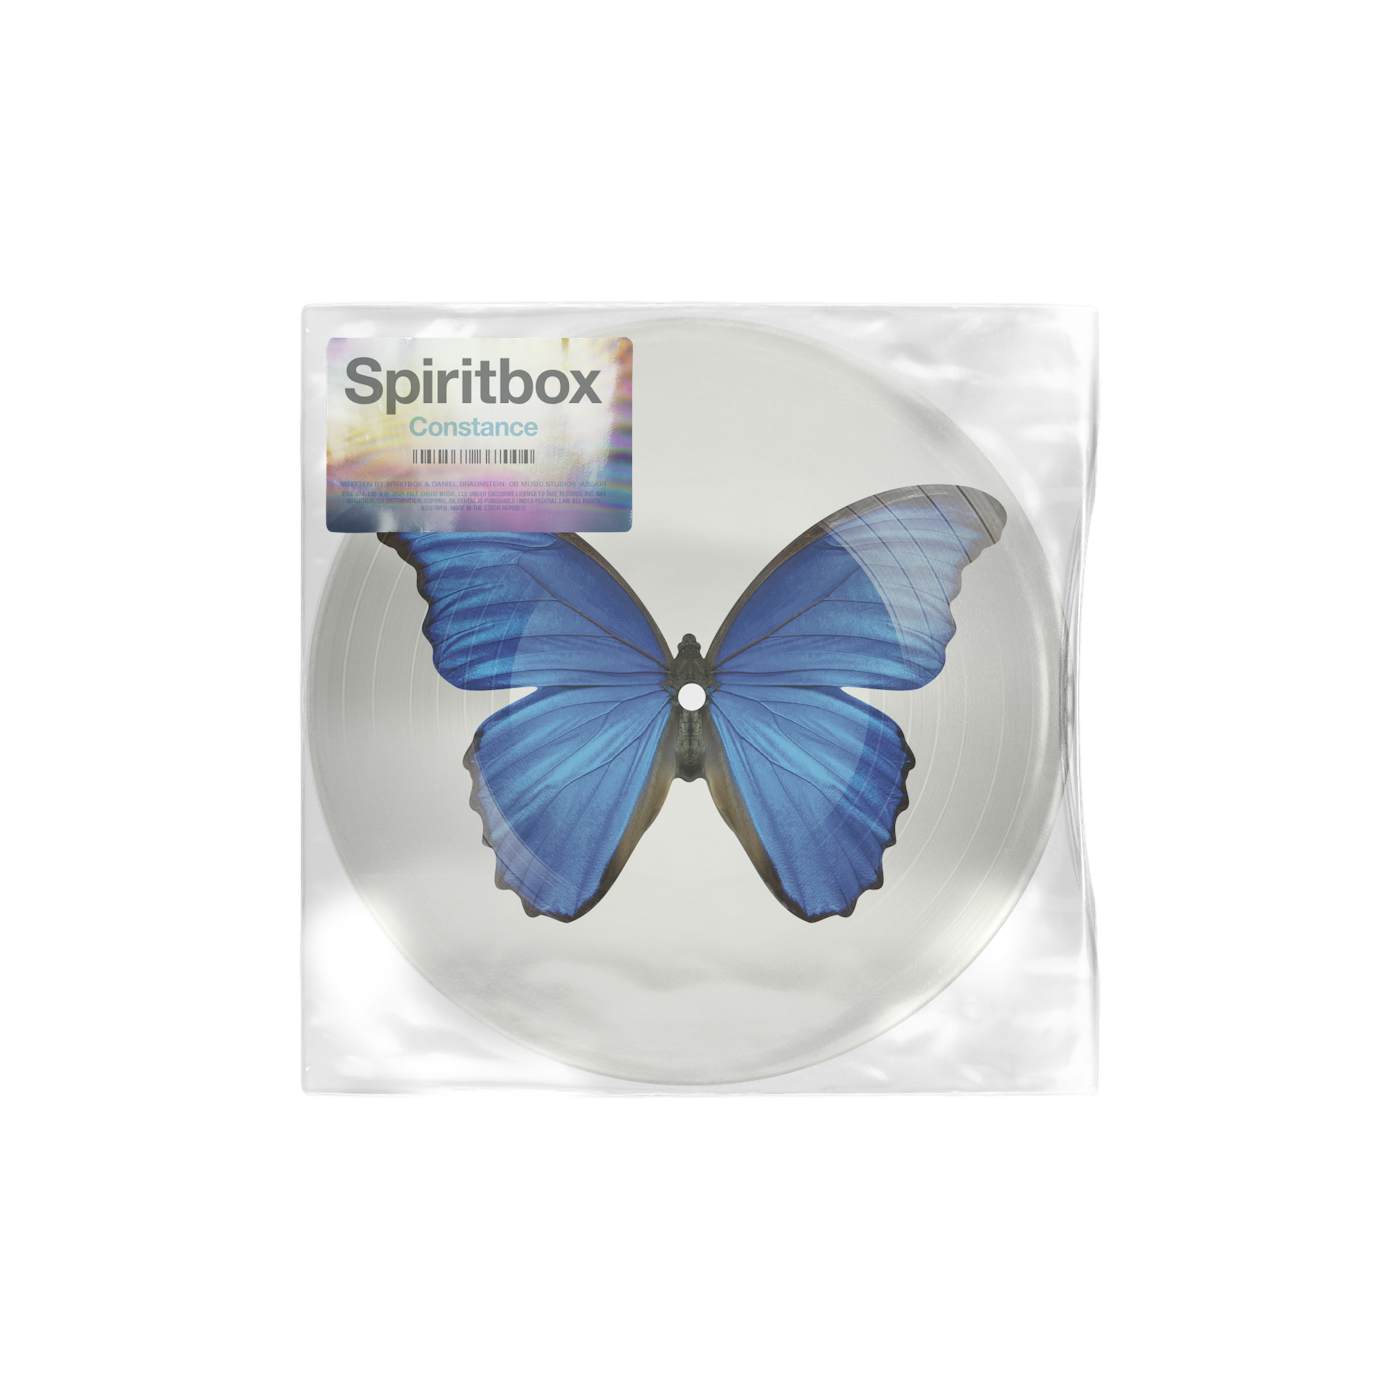 Spiritbox Constance 7" Vinyl (Butterfly Picture Disc)